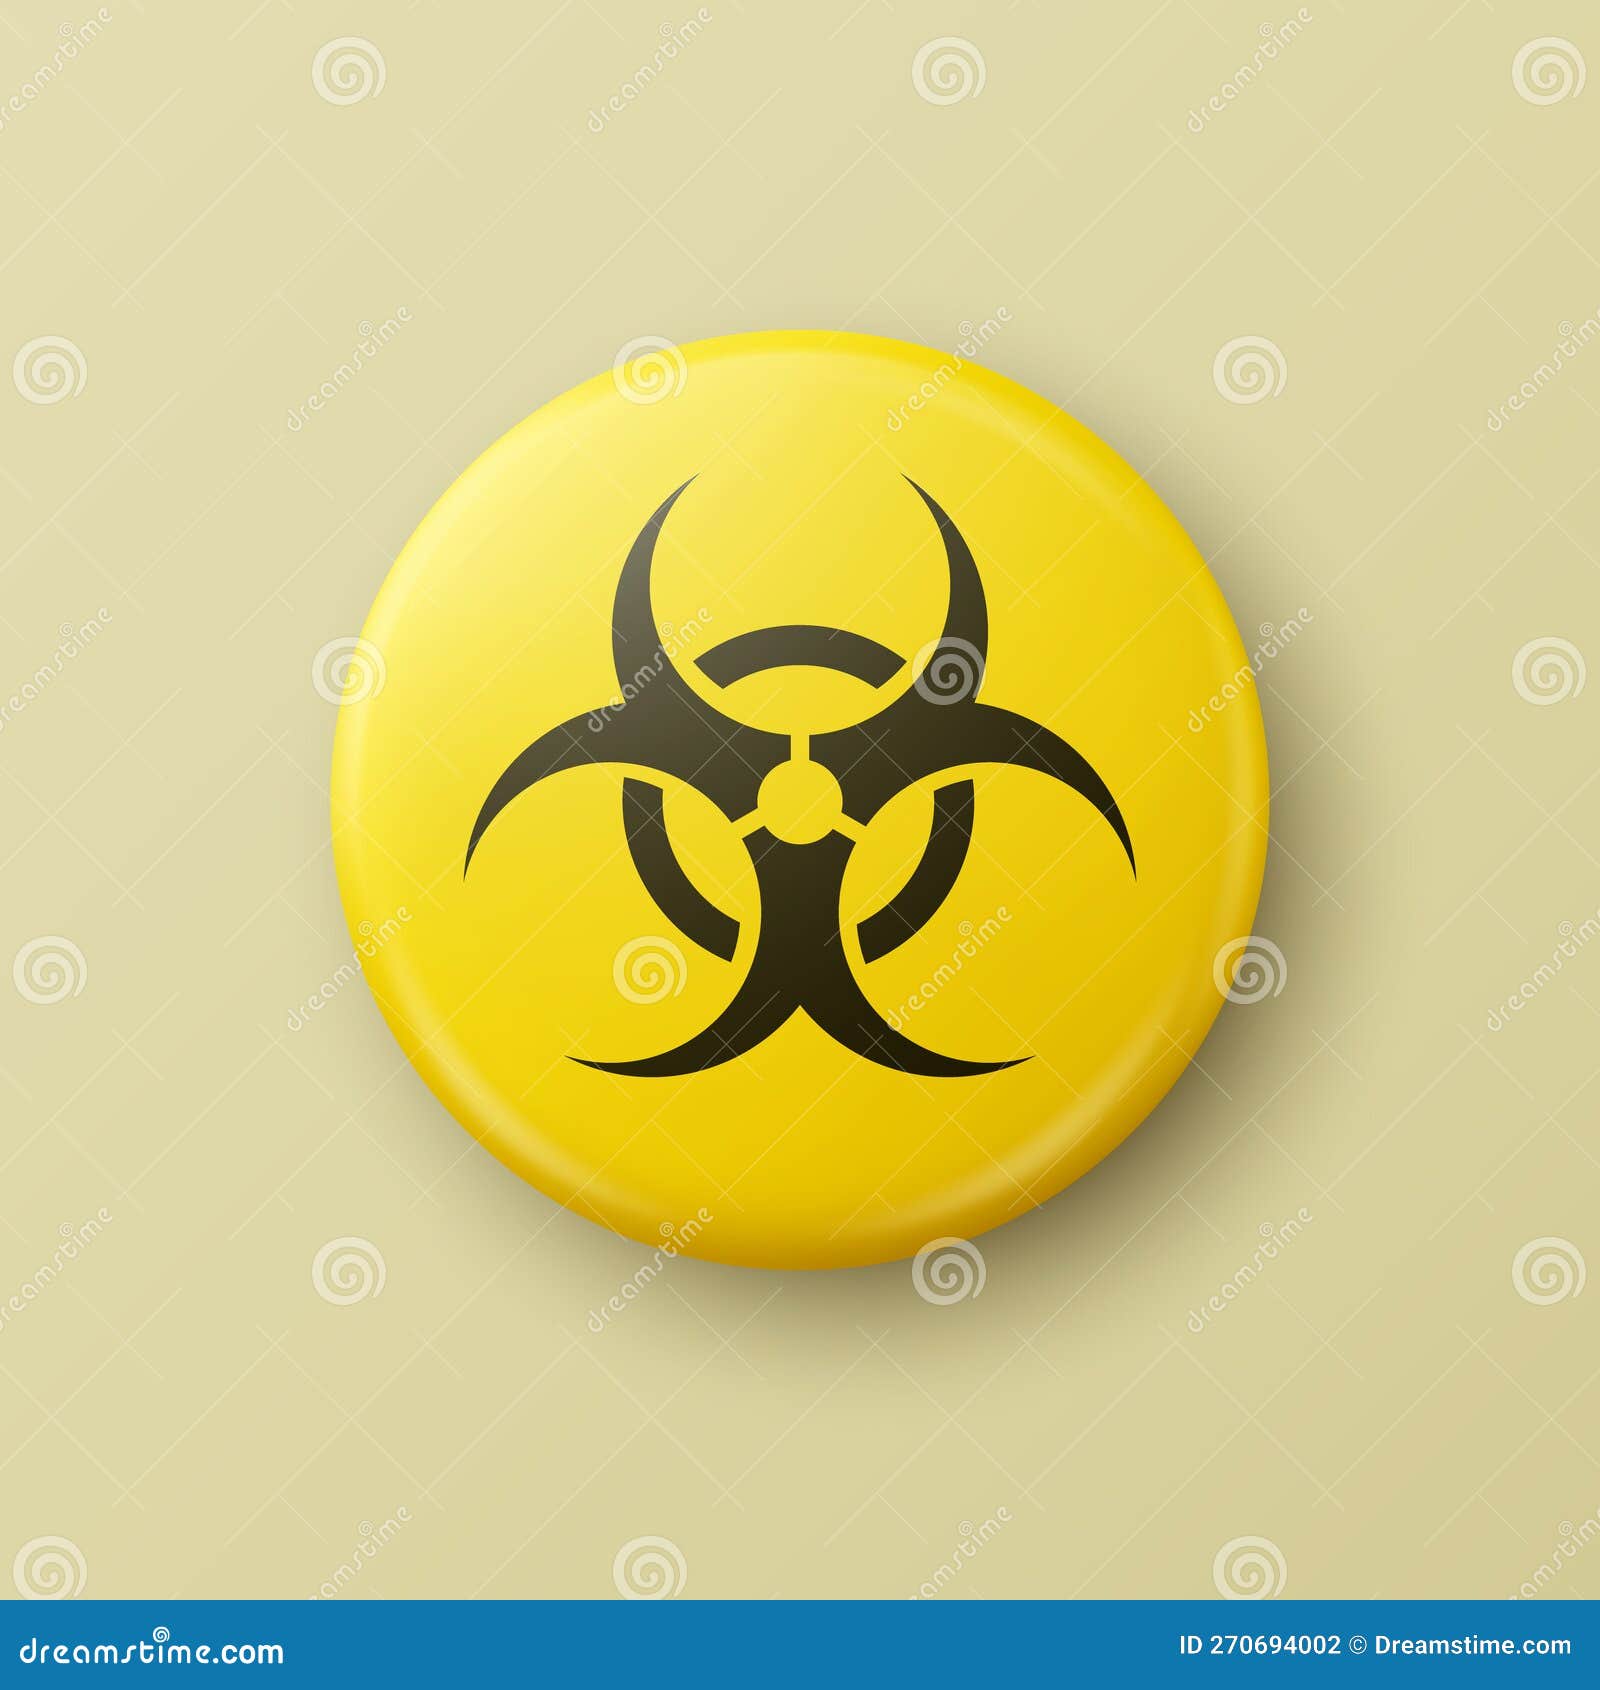 Vector 3d Realistic Round Yellow and Black Warning, Danger, Biohazard ...